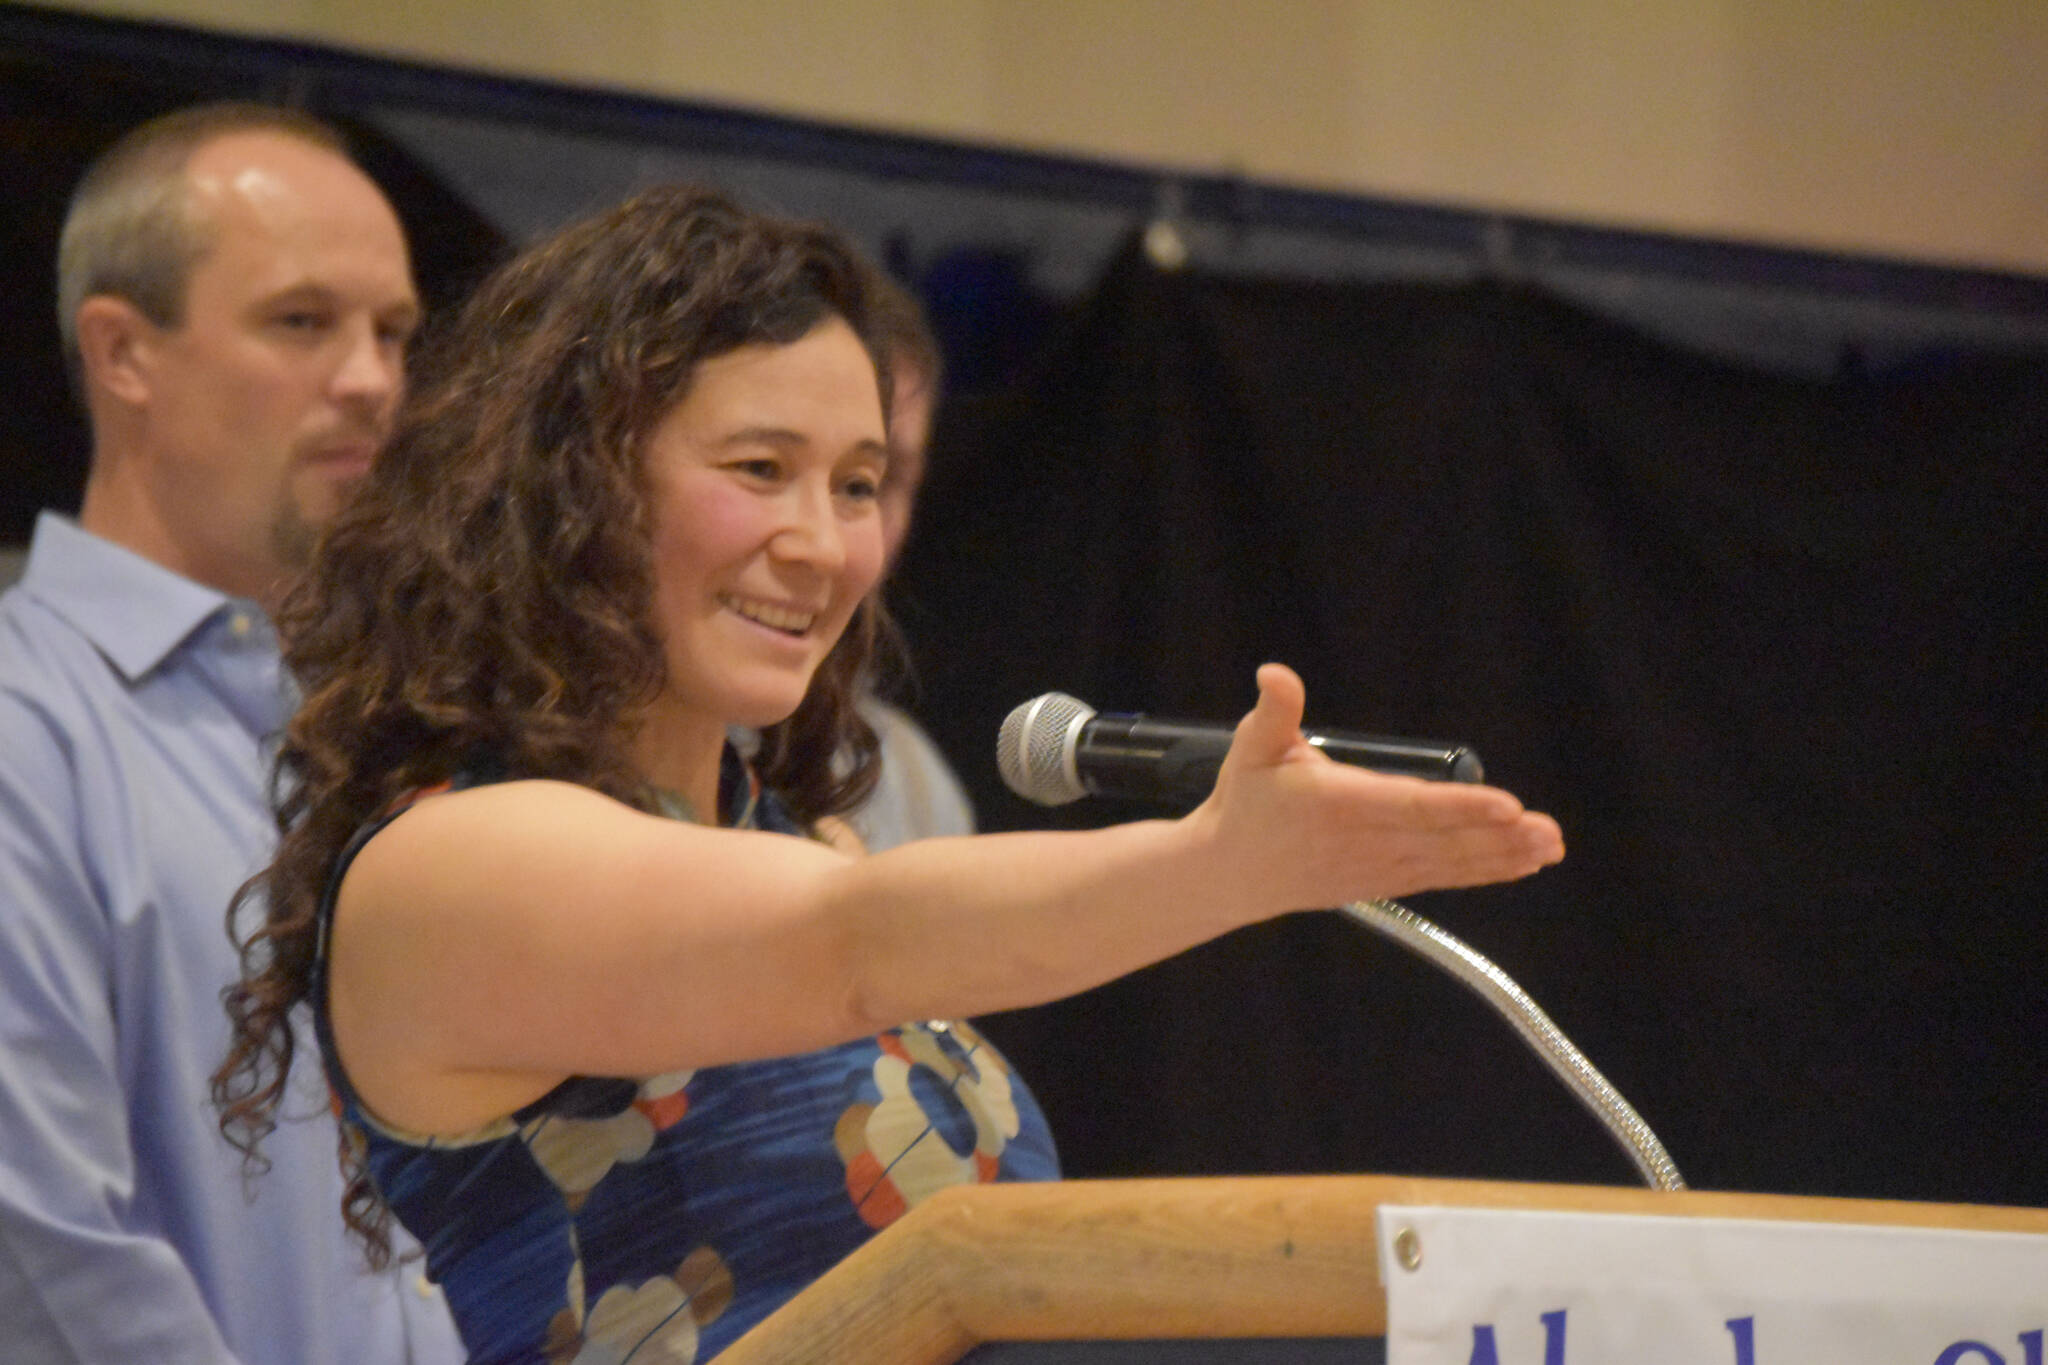 Tela O’Donnell-Bacher speaks while being inducted to the National Wrestling Hall of Fame following the duel wrestling meet on Tuesday, Nov. 22, 2022, at Soldotna High School in Soldotna, Alaska. (Jake Dye/Peninsula Clarion)